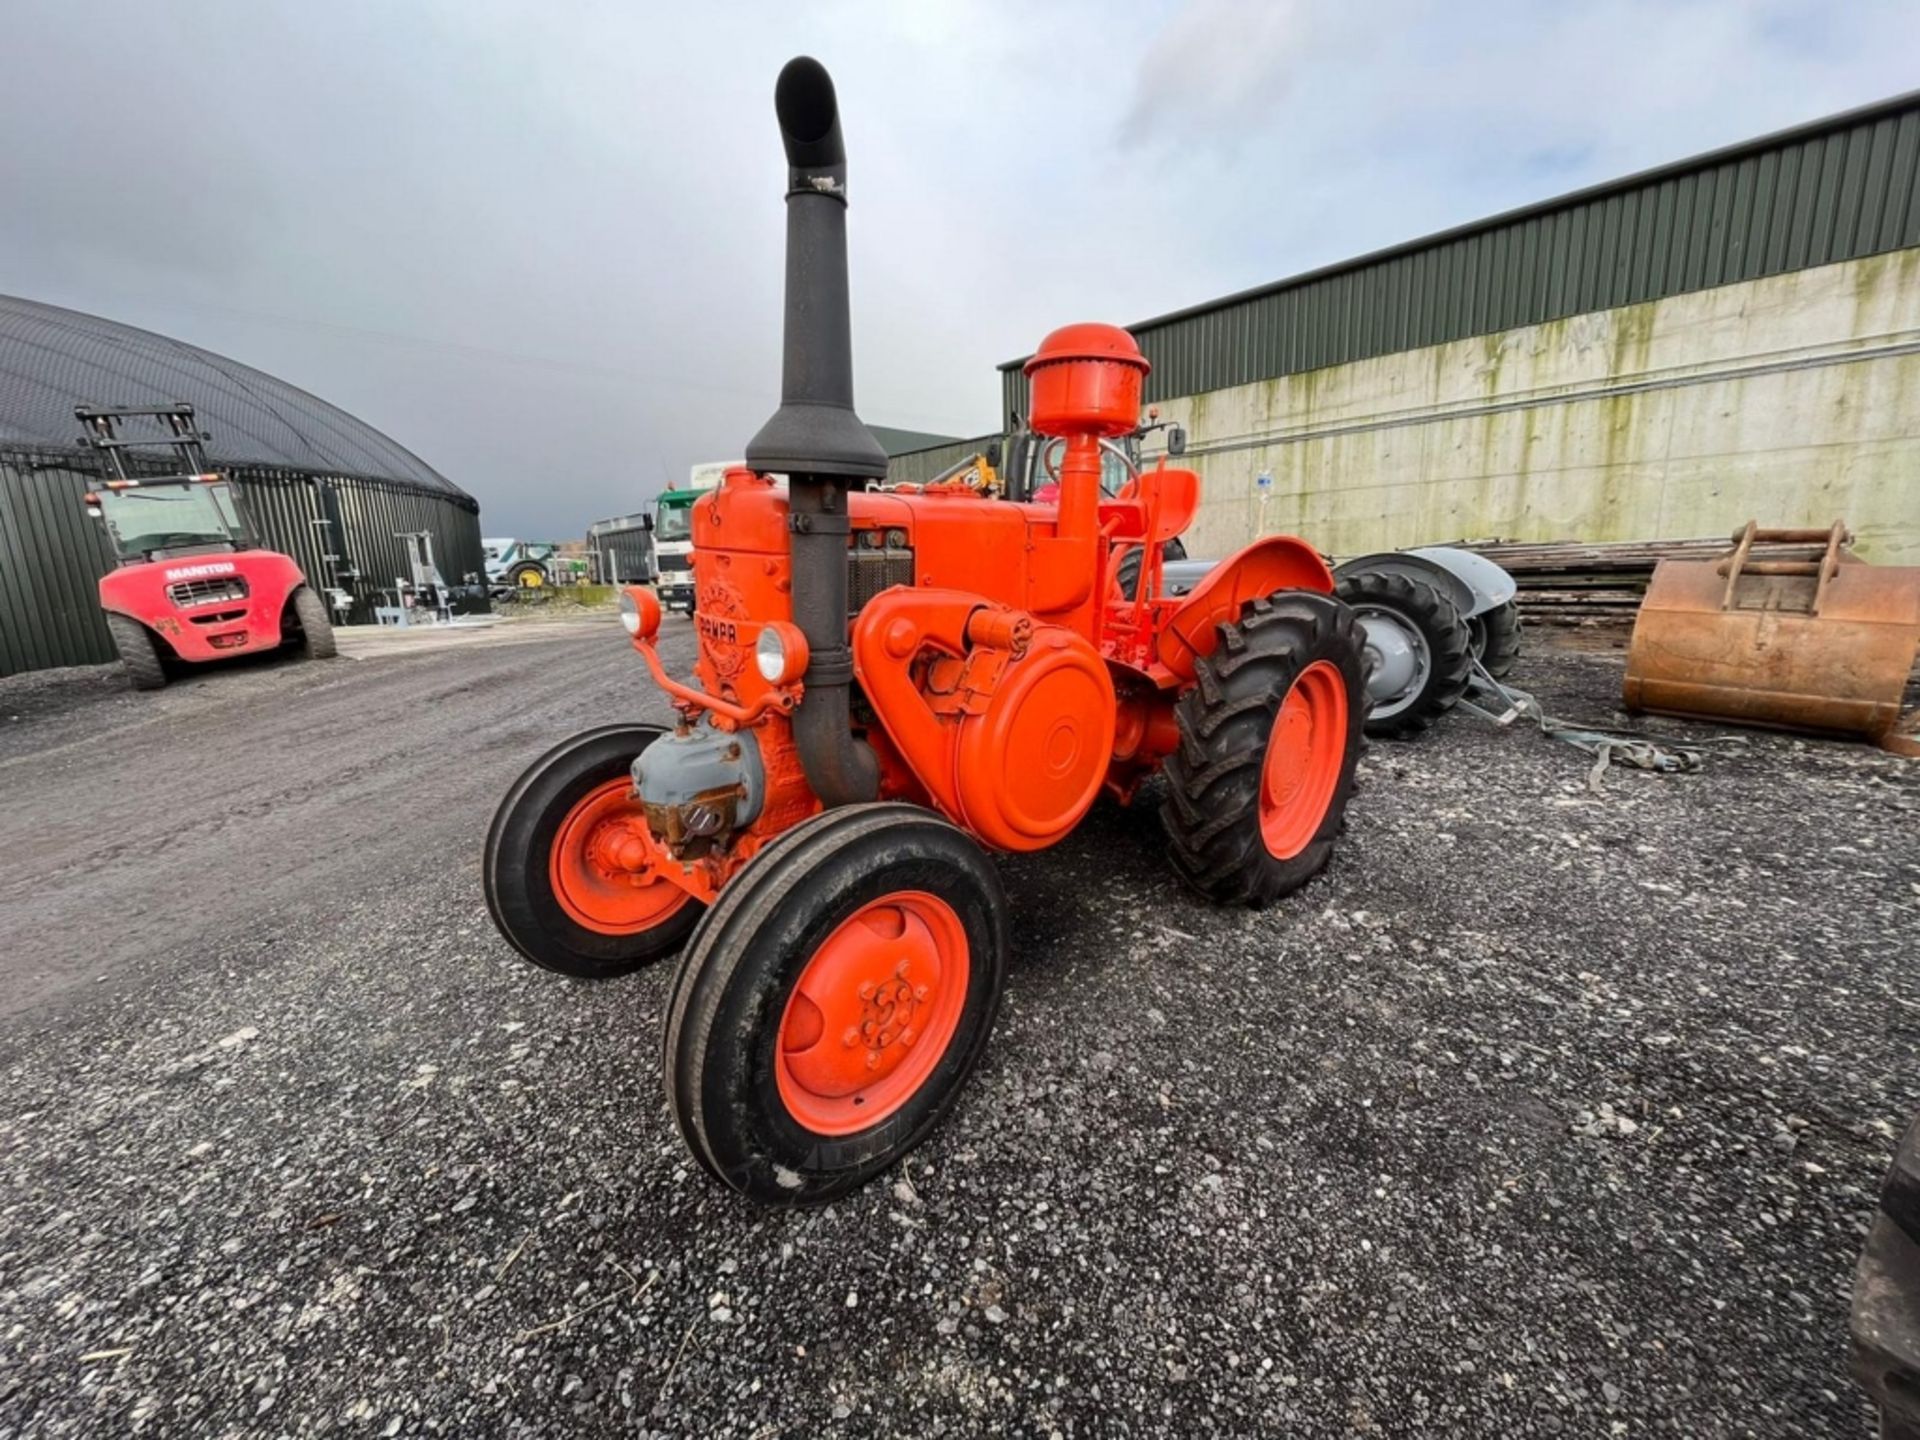 VINTAGE TRACTOR DINFIO PAMPA - Image 10 of 29